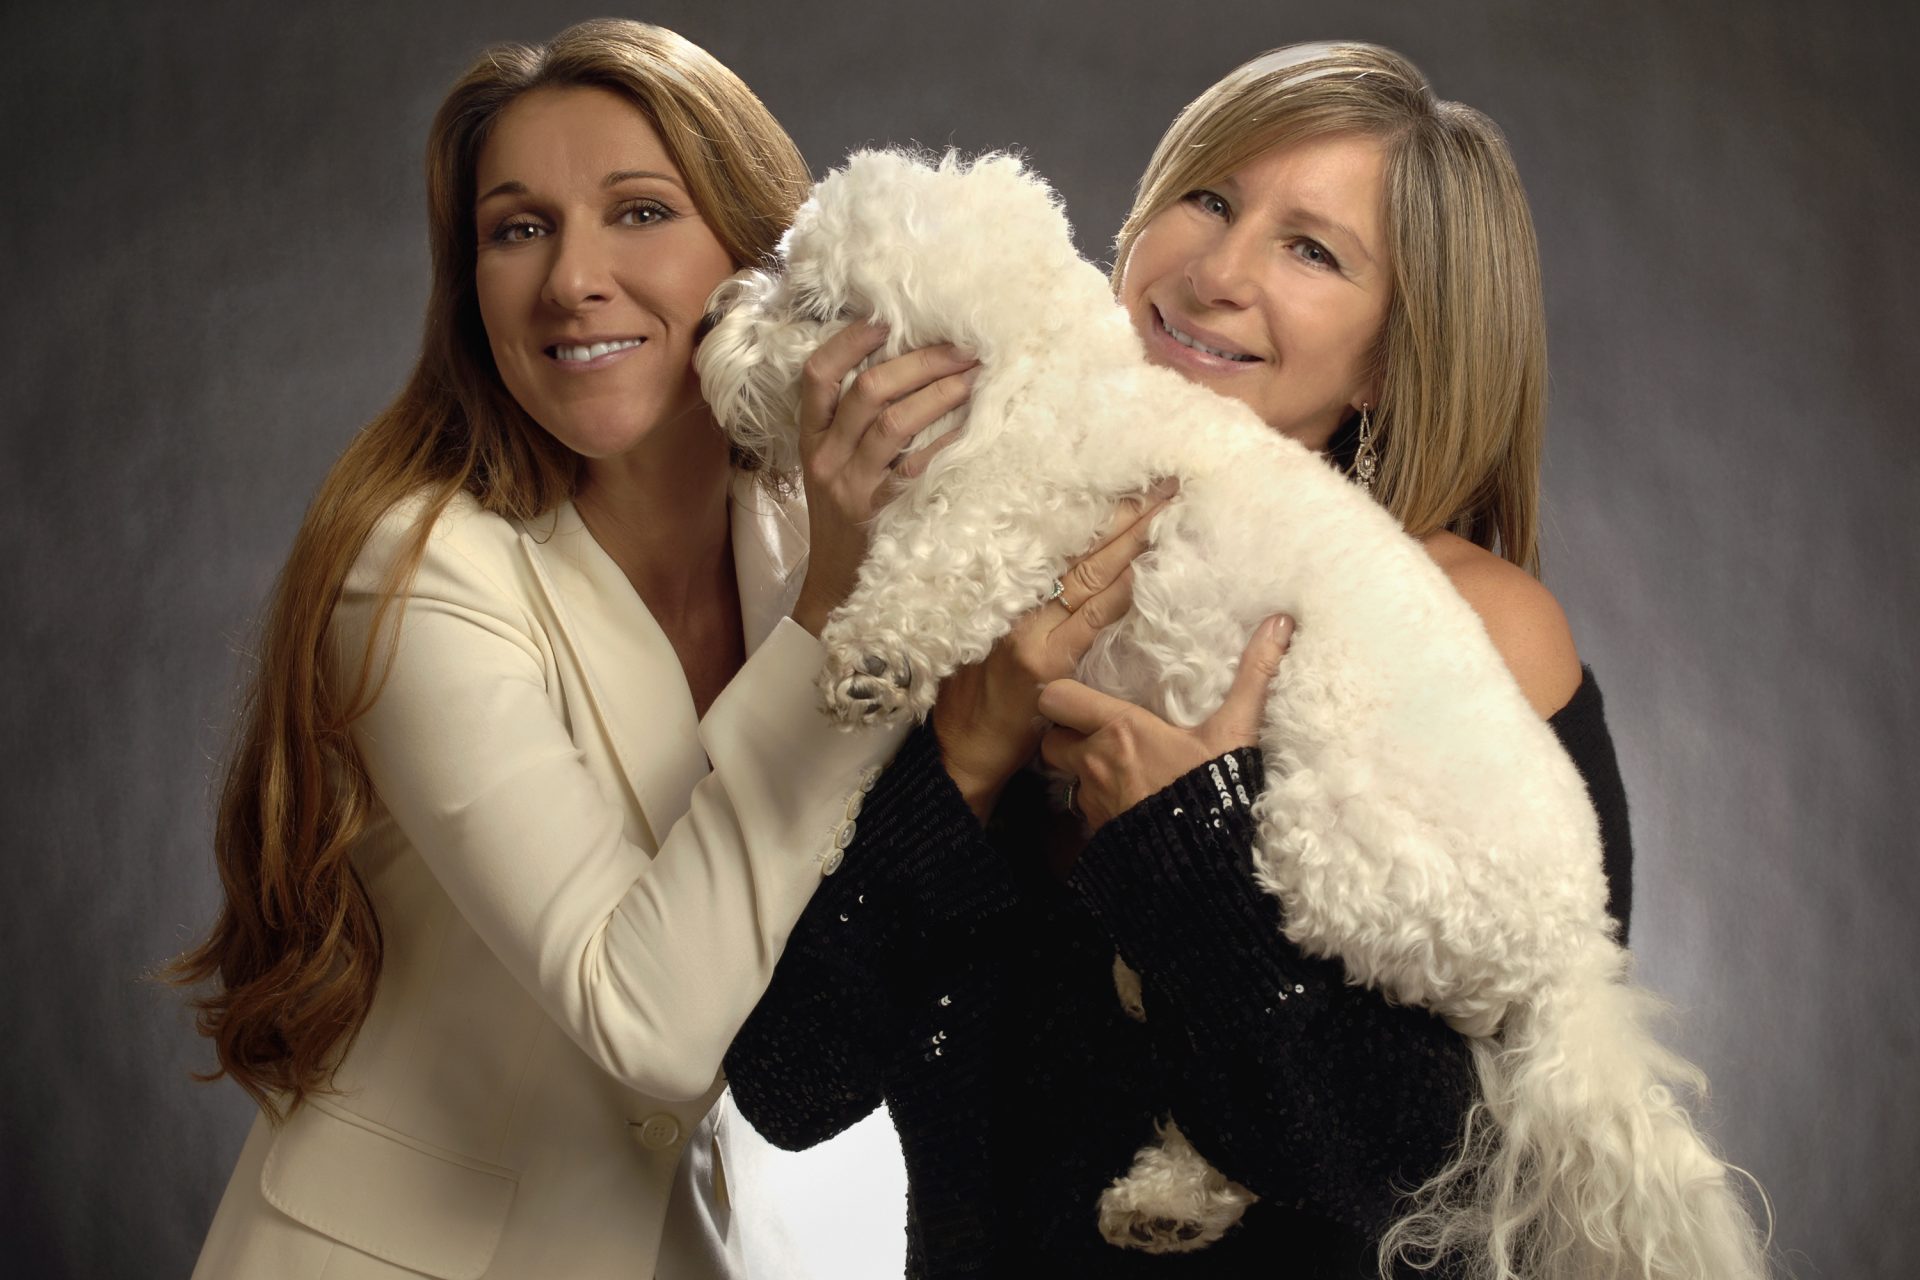 Yes, Barbra Streisand cloned her dogs. This is the strange story...